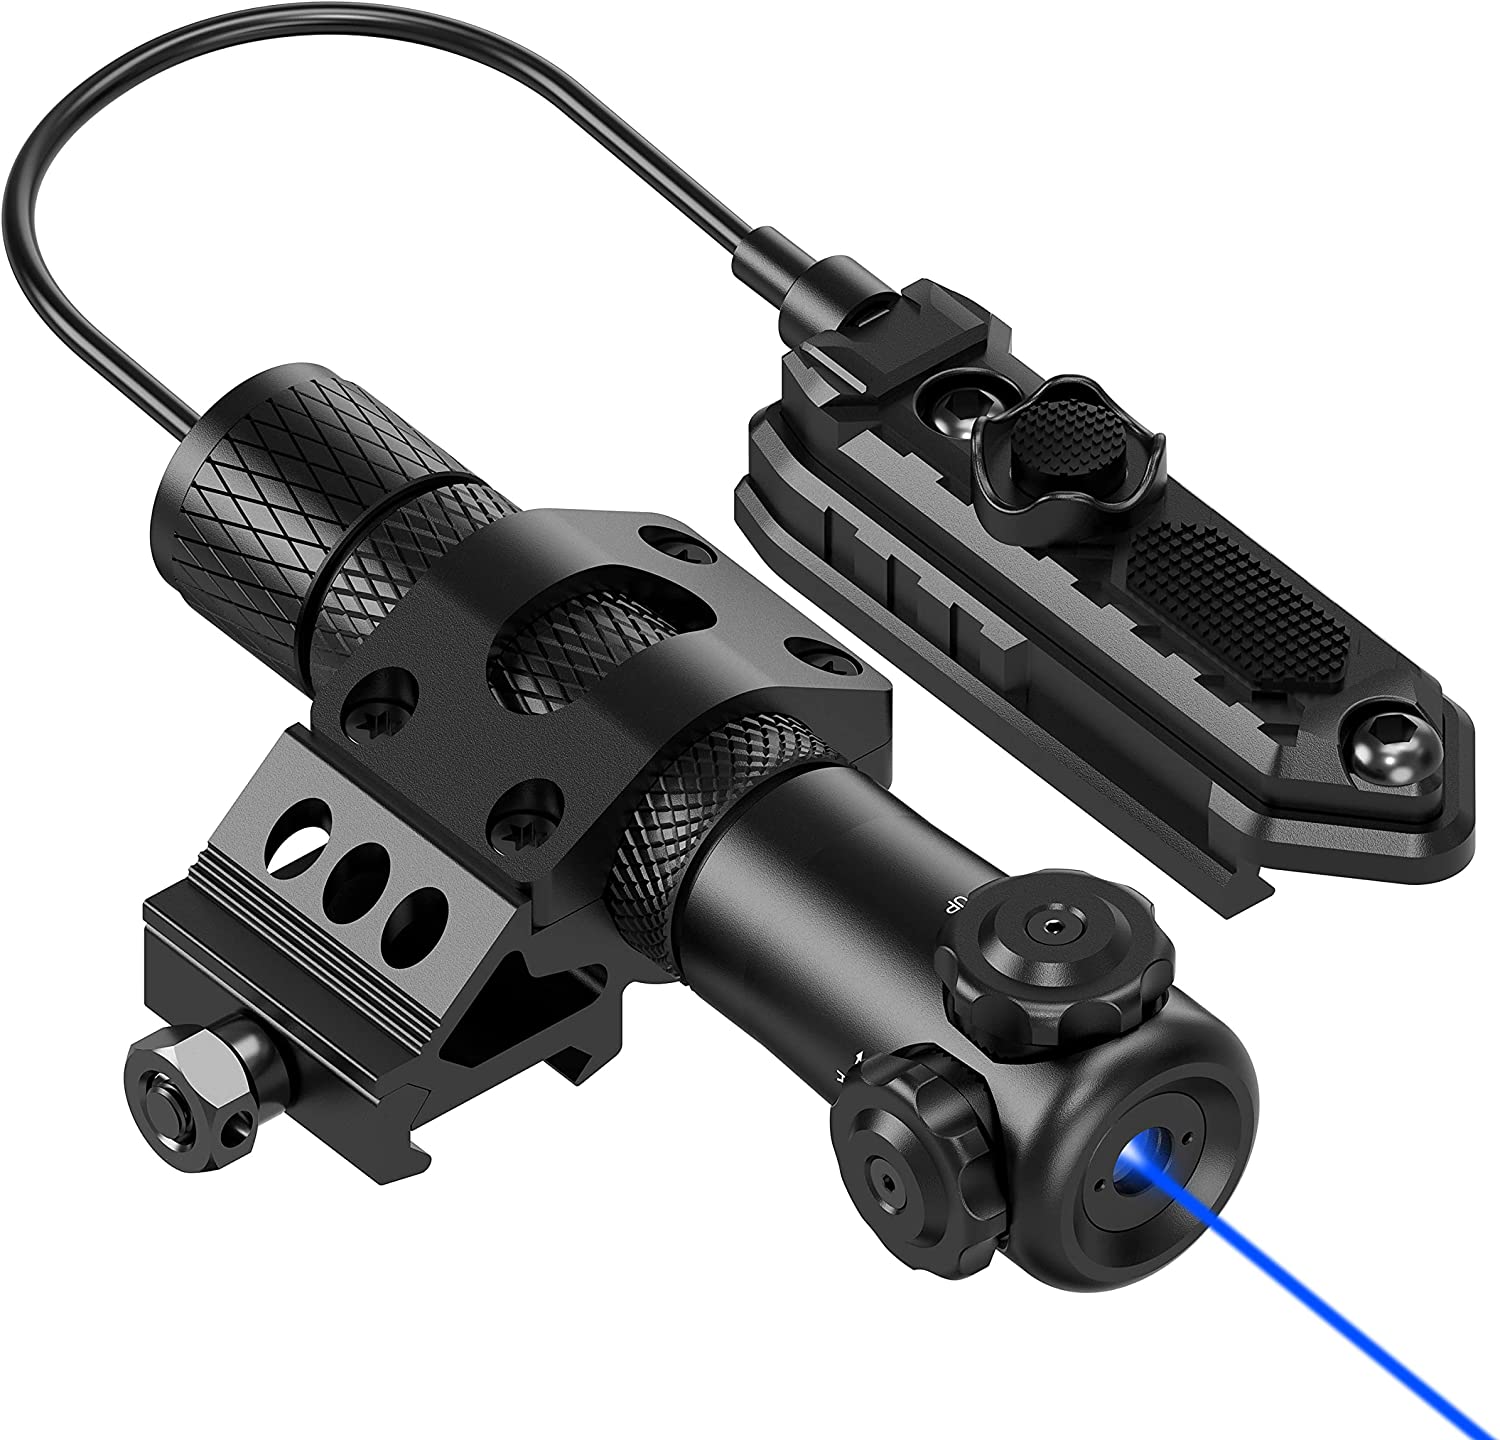 Feyachi Blue Laser Sight Red Dot Rifle Scope with 20mm Picatinny Mount and Pressure Switch Included